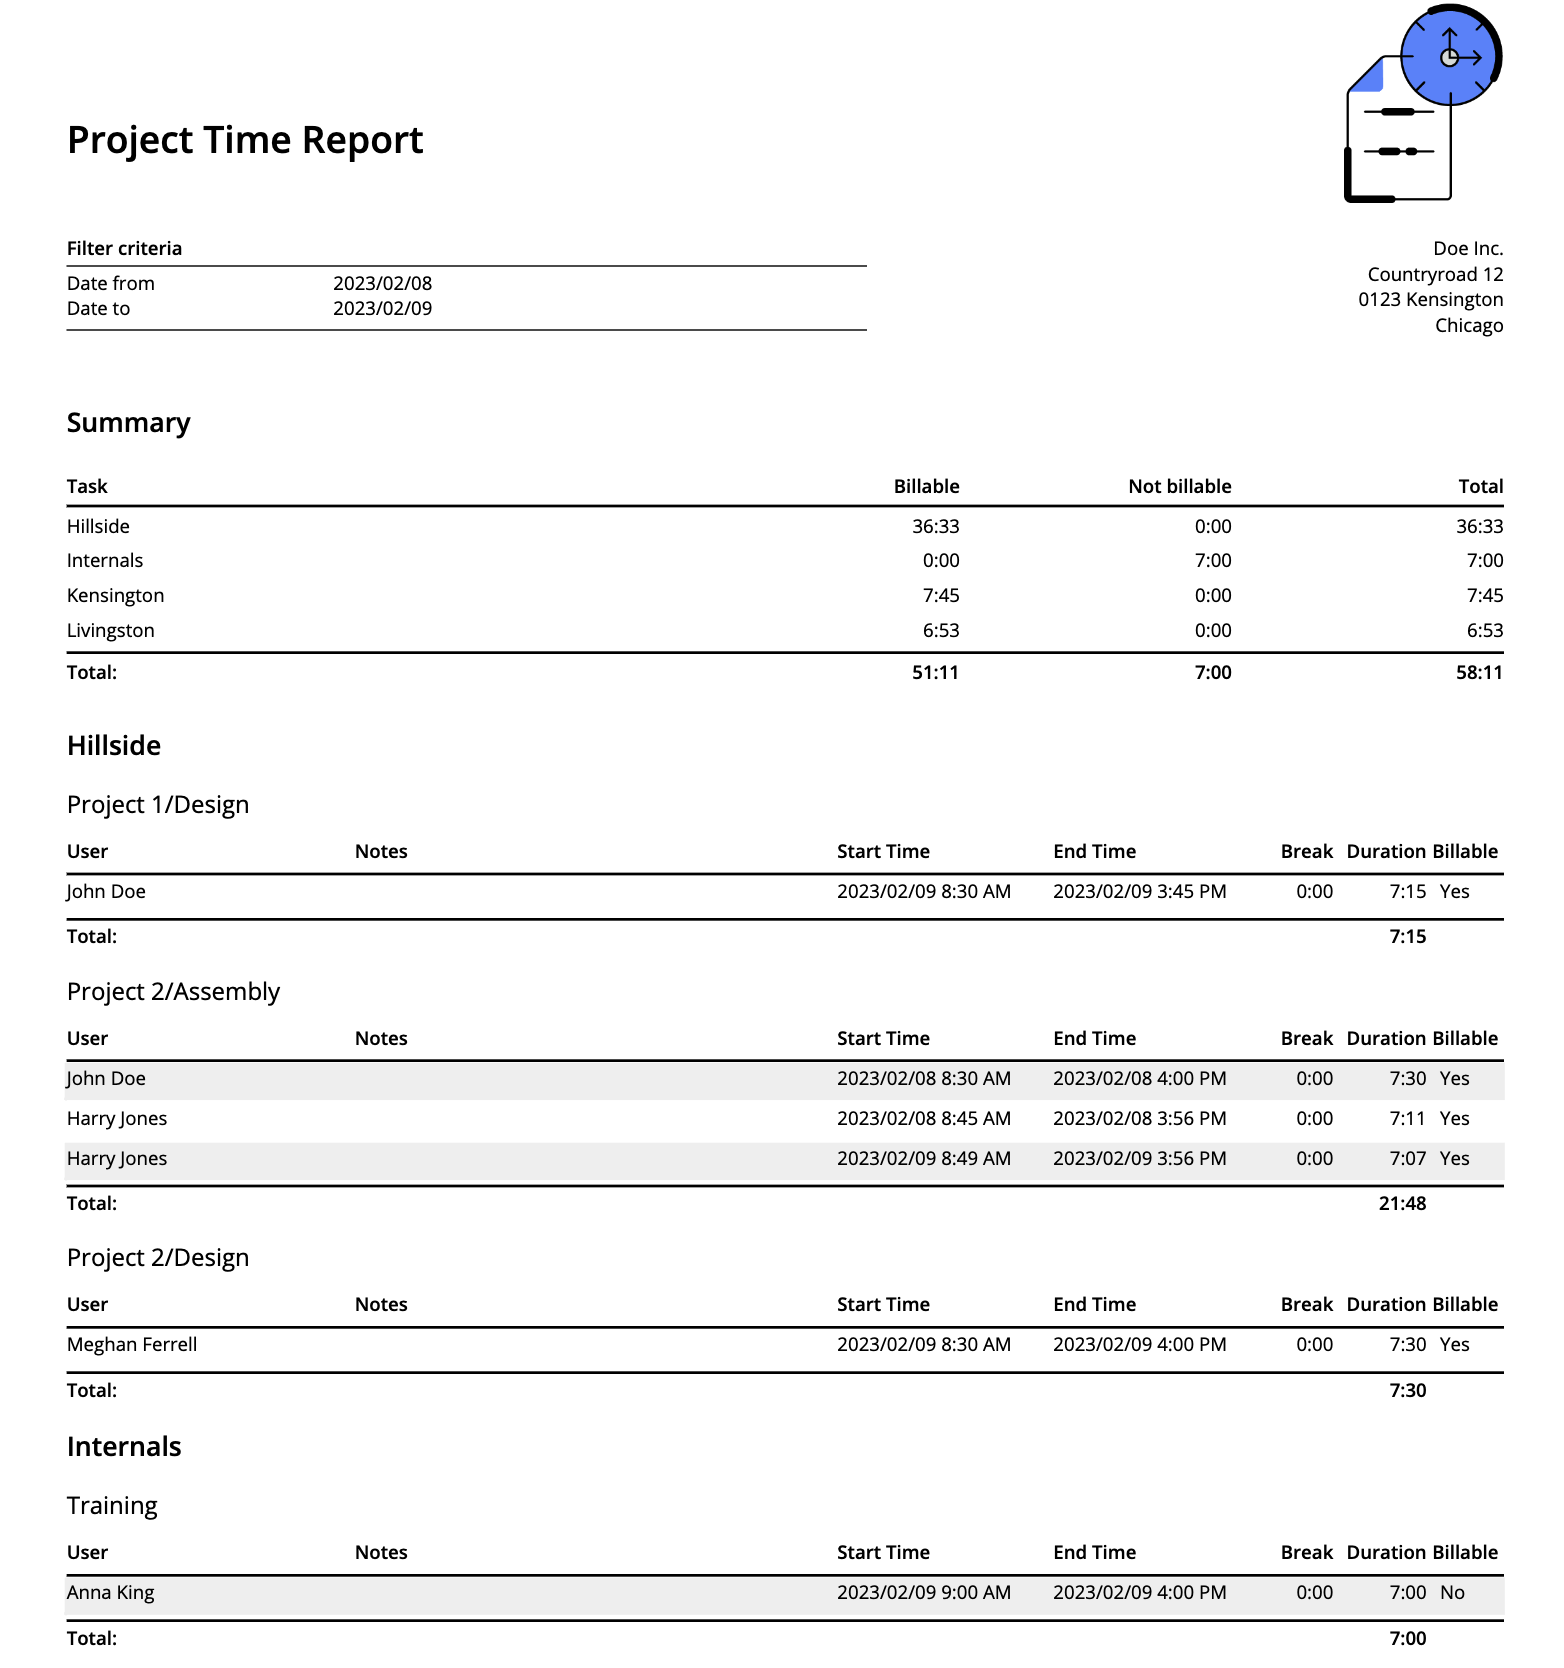 project time report task.png